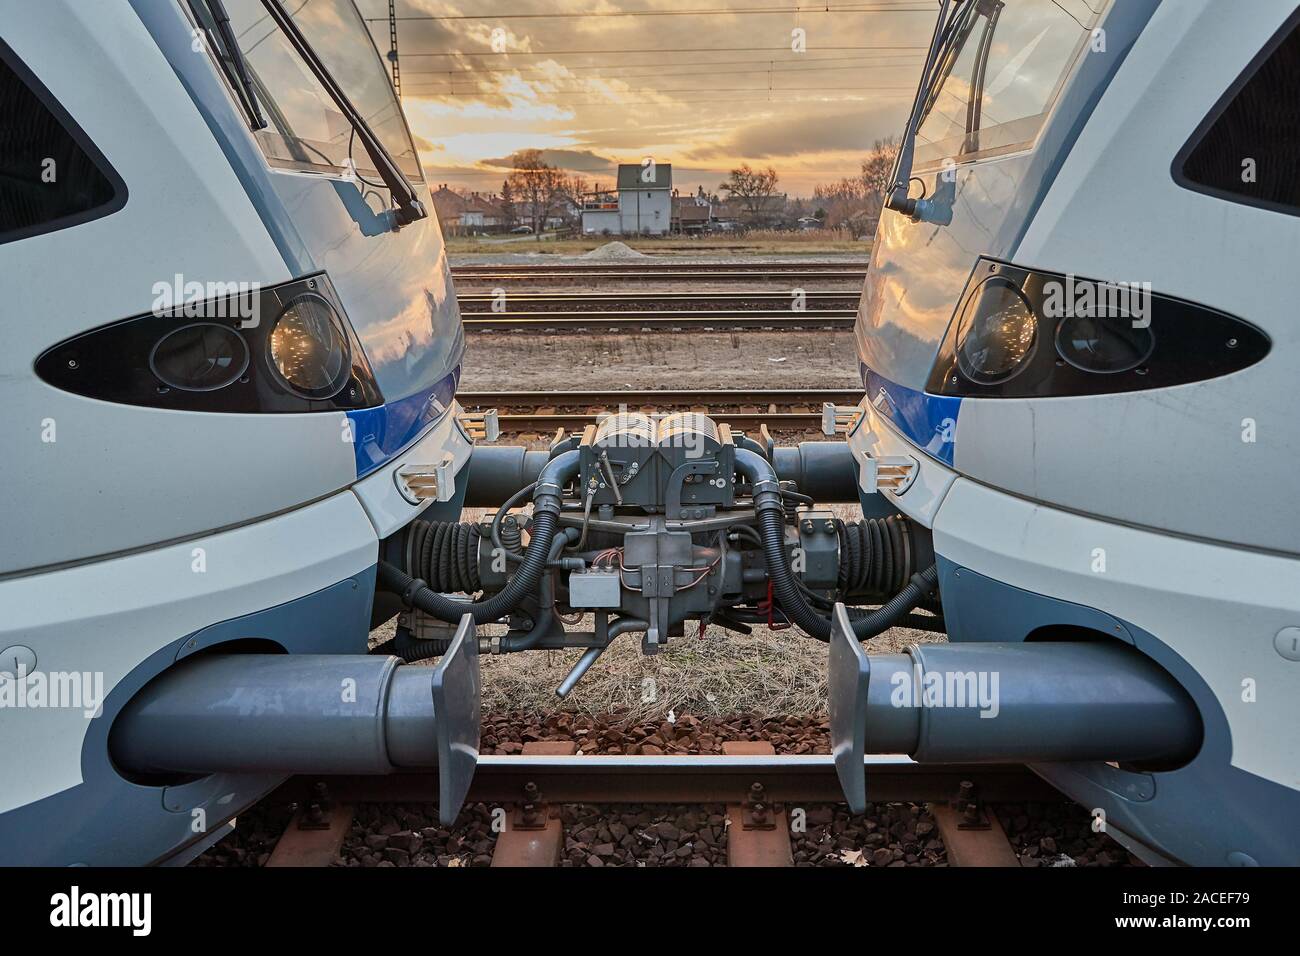 Train carriages connected at a station Stock Photo